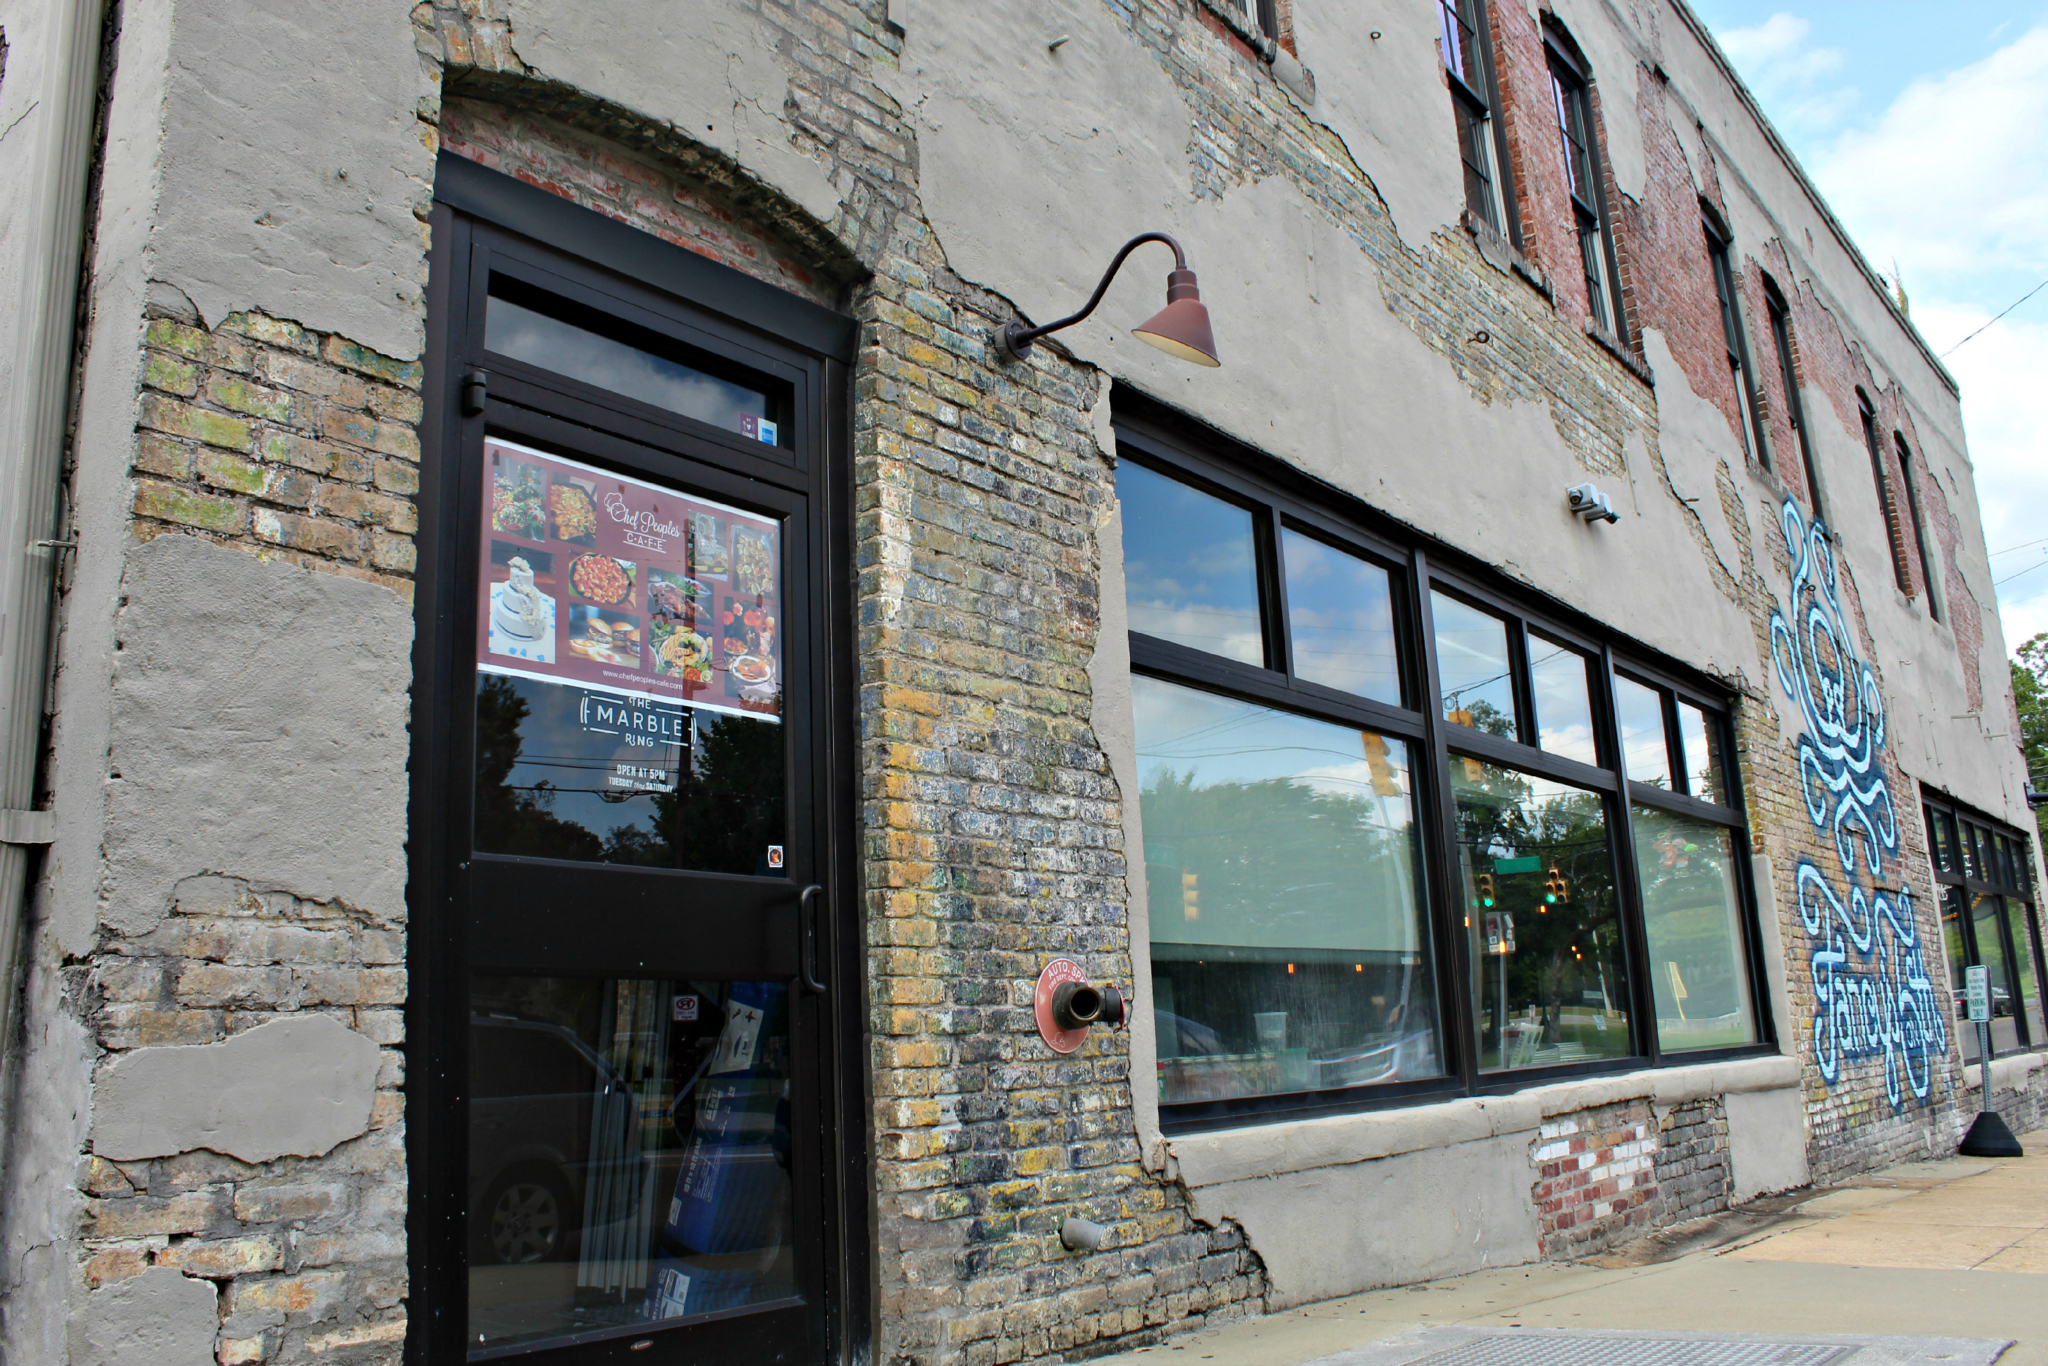 chef peoples cafe Chef Peoples Cafe coming to the old site of Avondale's Hot Diggity Dogs